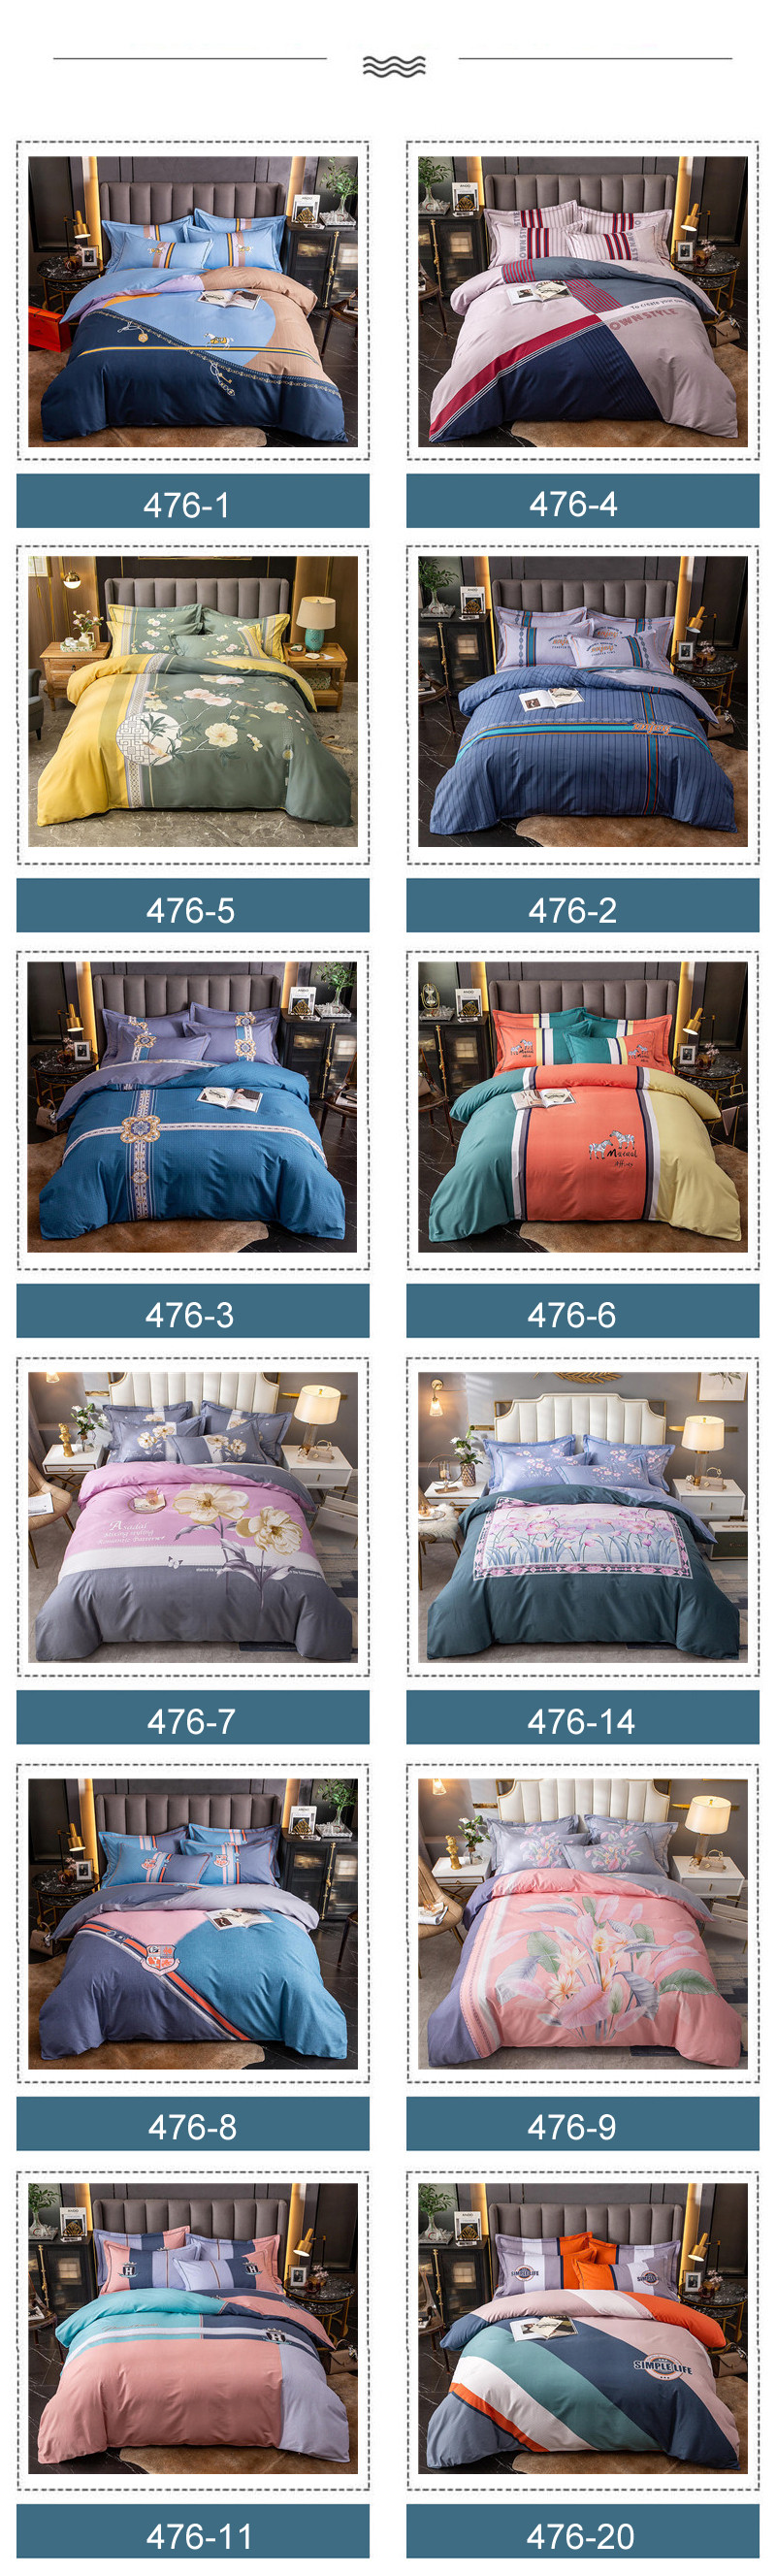 Low Price Bedding Set Twin Size